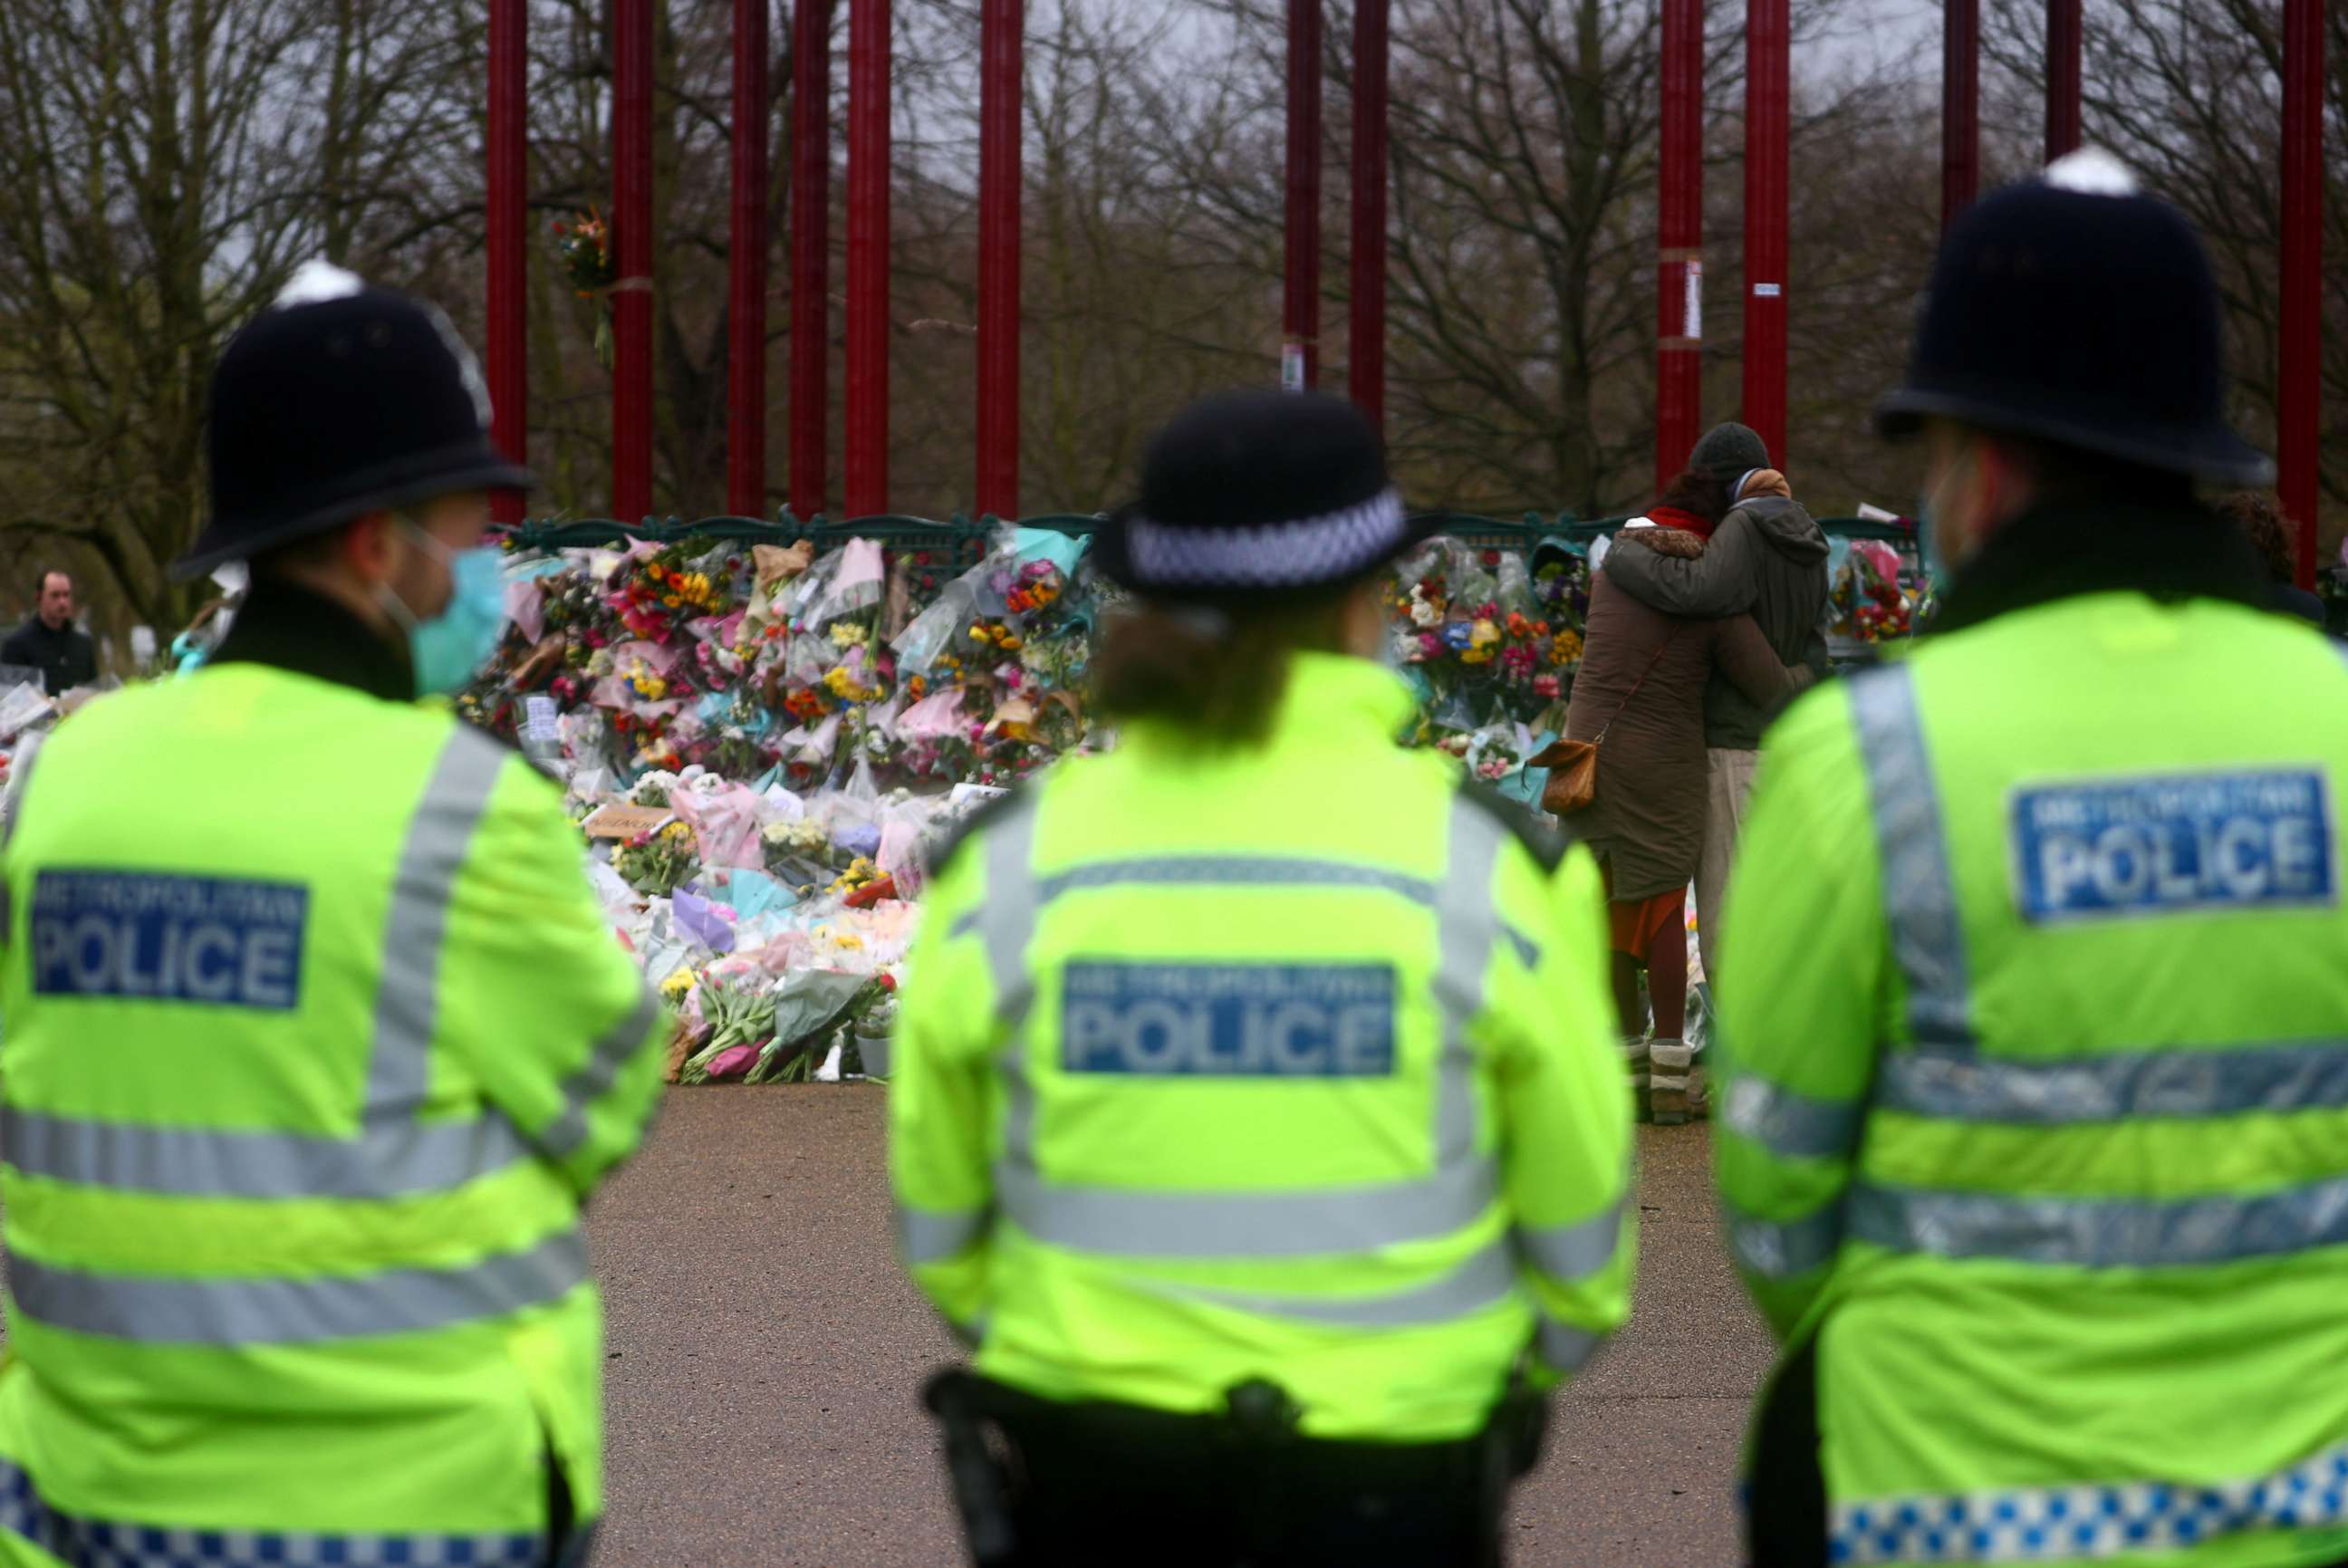 PHOTO: Police officers stand guard at a memorial site at Clapham Common Bandstand, following the kidnap and murder of Sarah Everard, in London, Britain March 15, 2021.